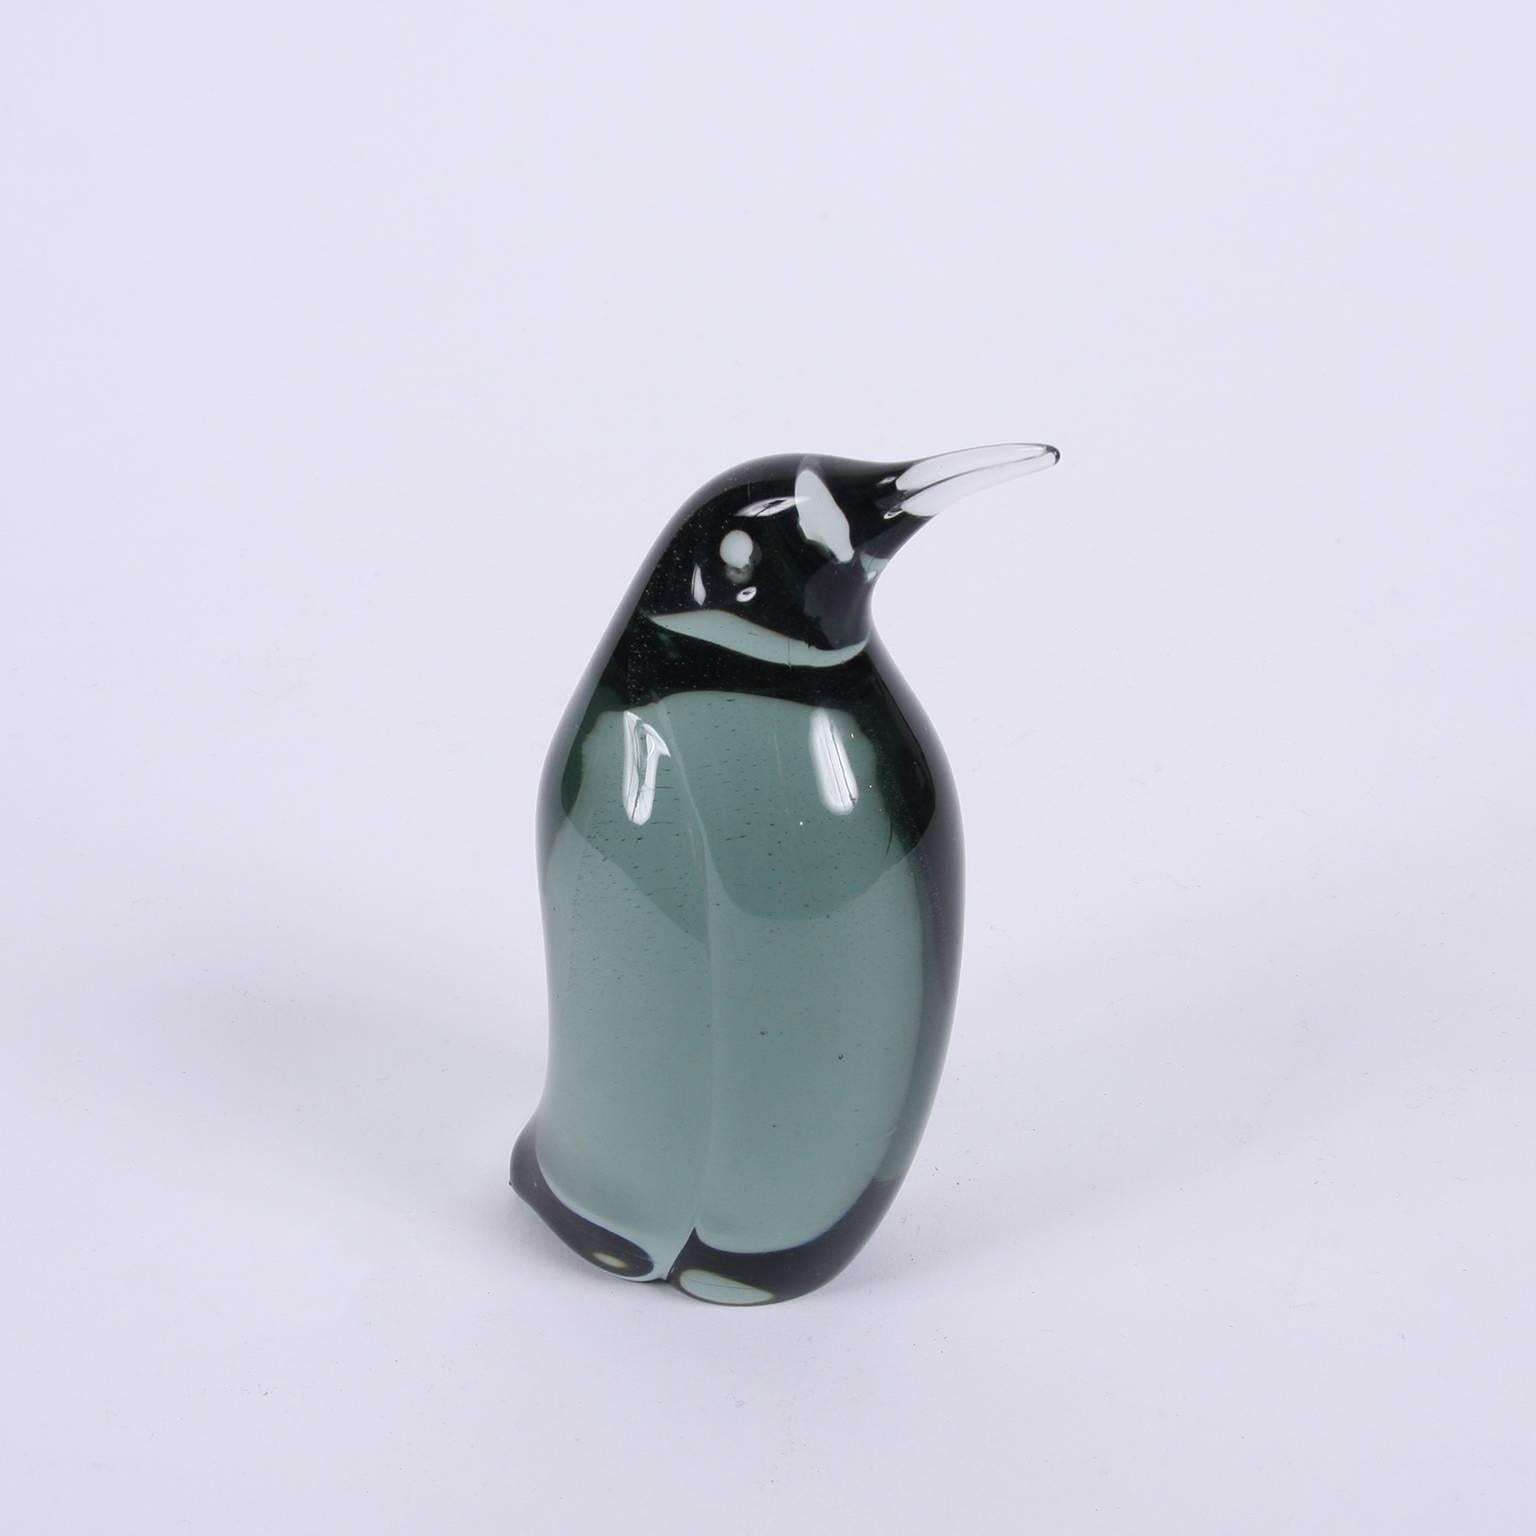 Swedish, circa 1960.

A sweet small decorative studio glass penguin in a transparent dark green or grey. This is a stunning small decorative piece in fantastic condition.